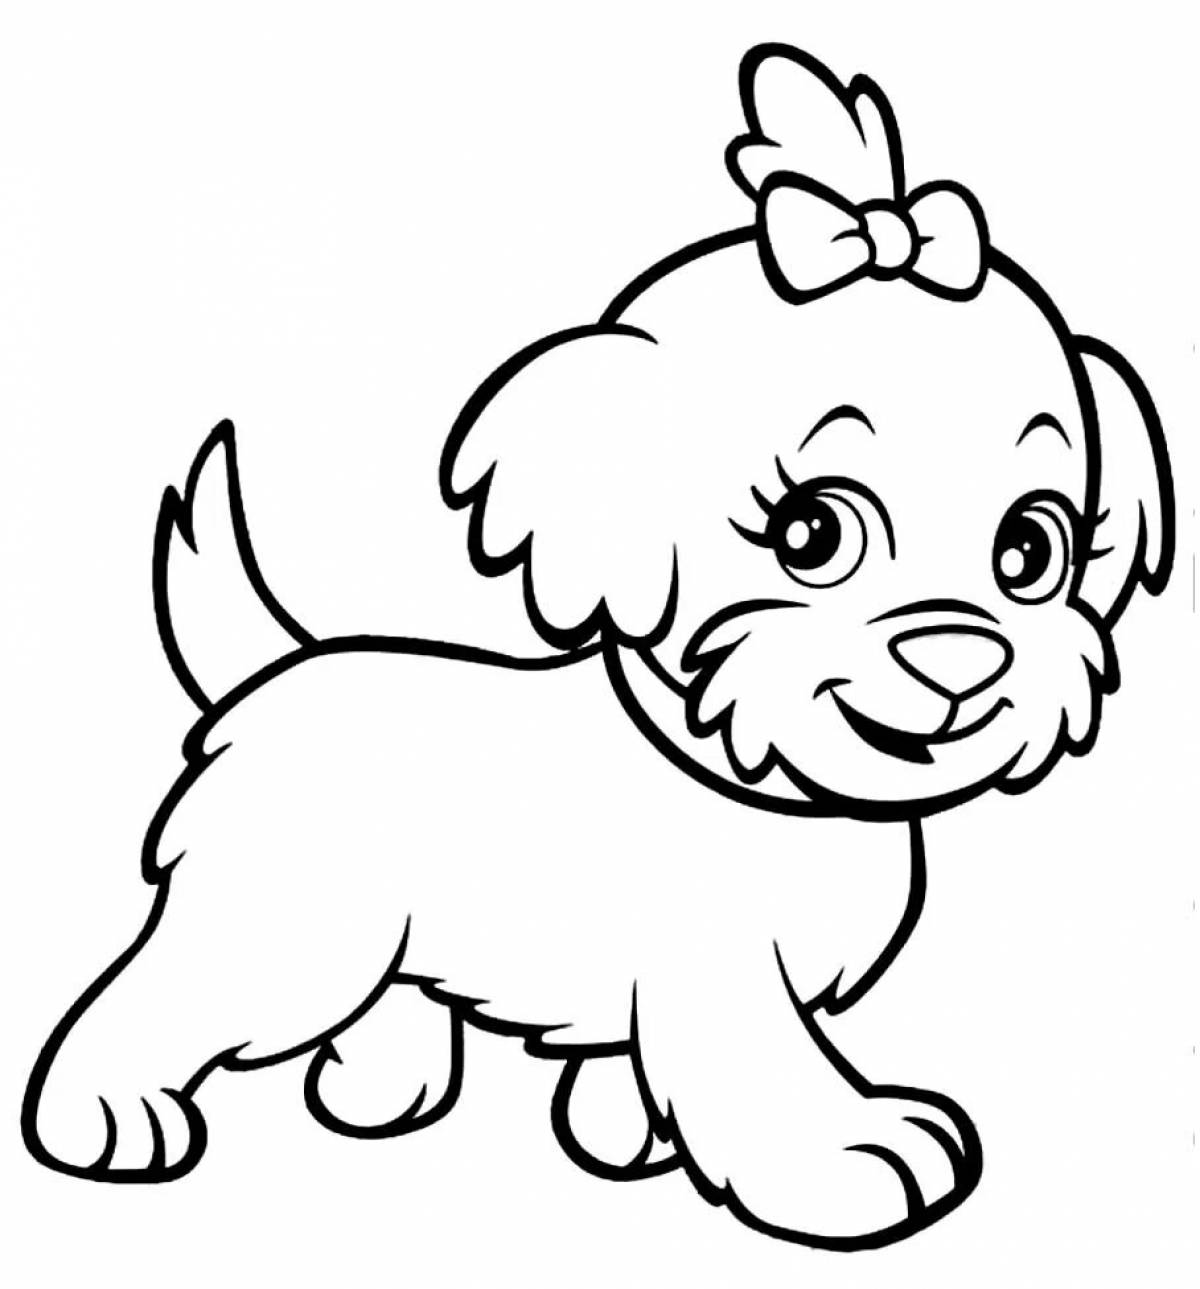 Unique cat and dog coloring pages for kids 3 4 years old